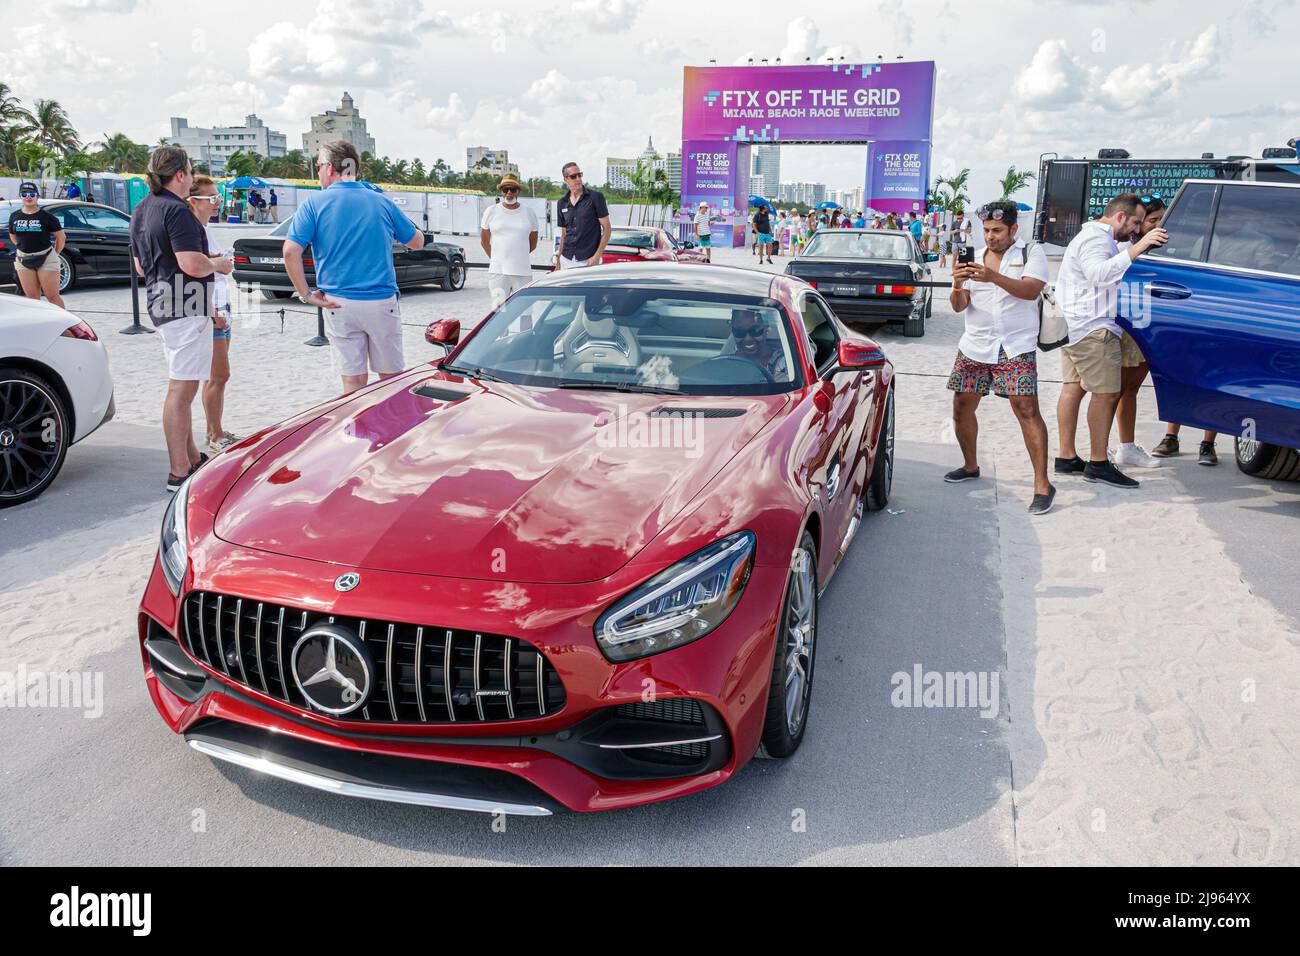 Miami Beach Florida,FTX Off the Grid free event,Race Weekend Grand Prix Formula One 1 F1 racing event,red Mercedes Benz sports car Stock Photo